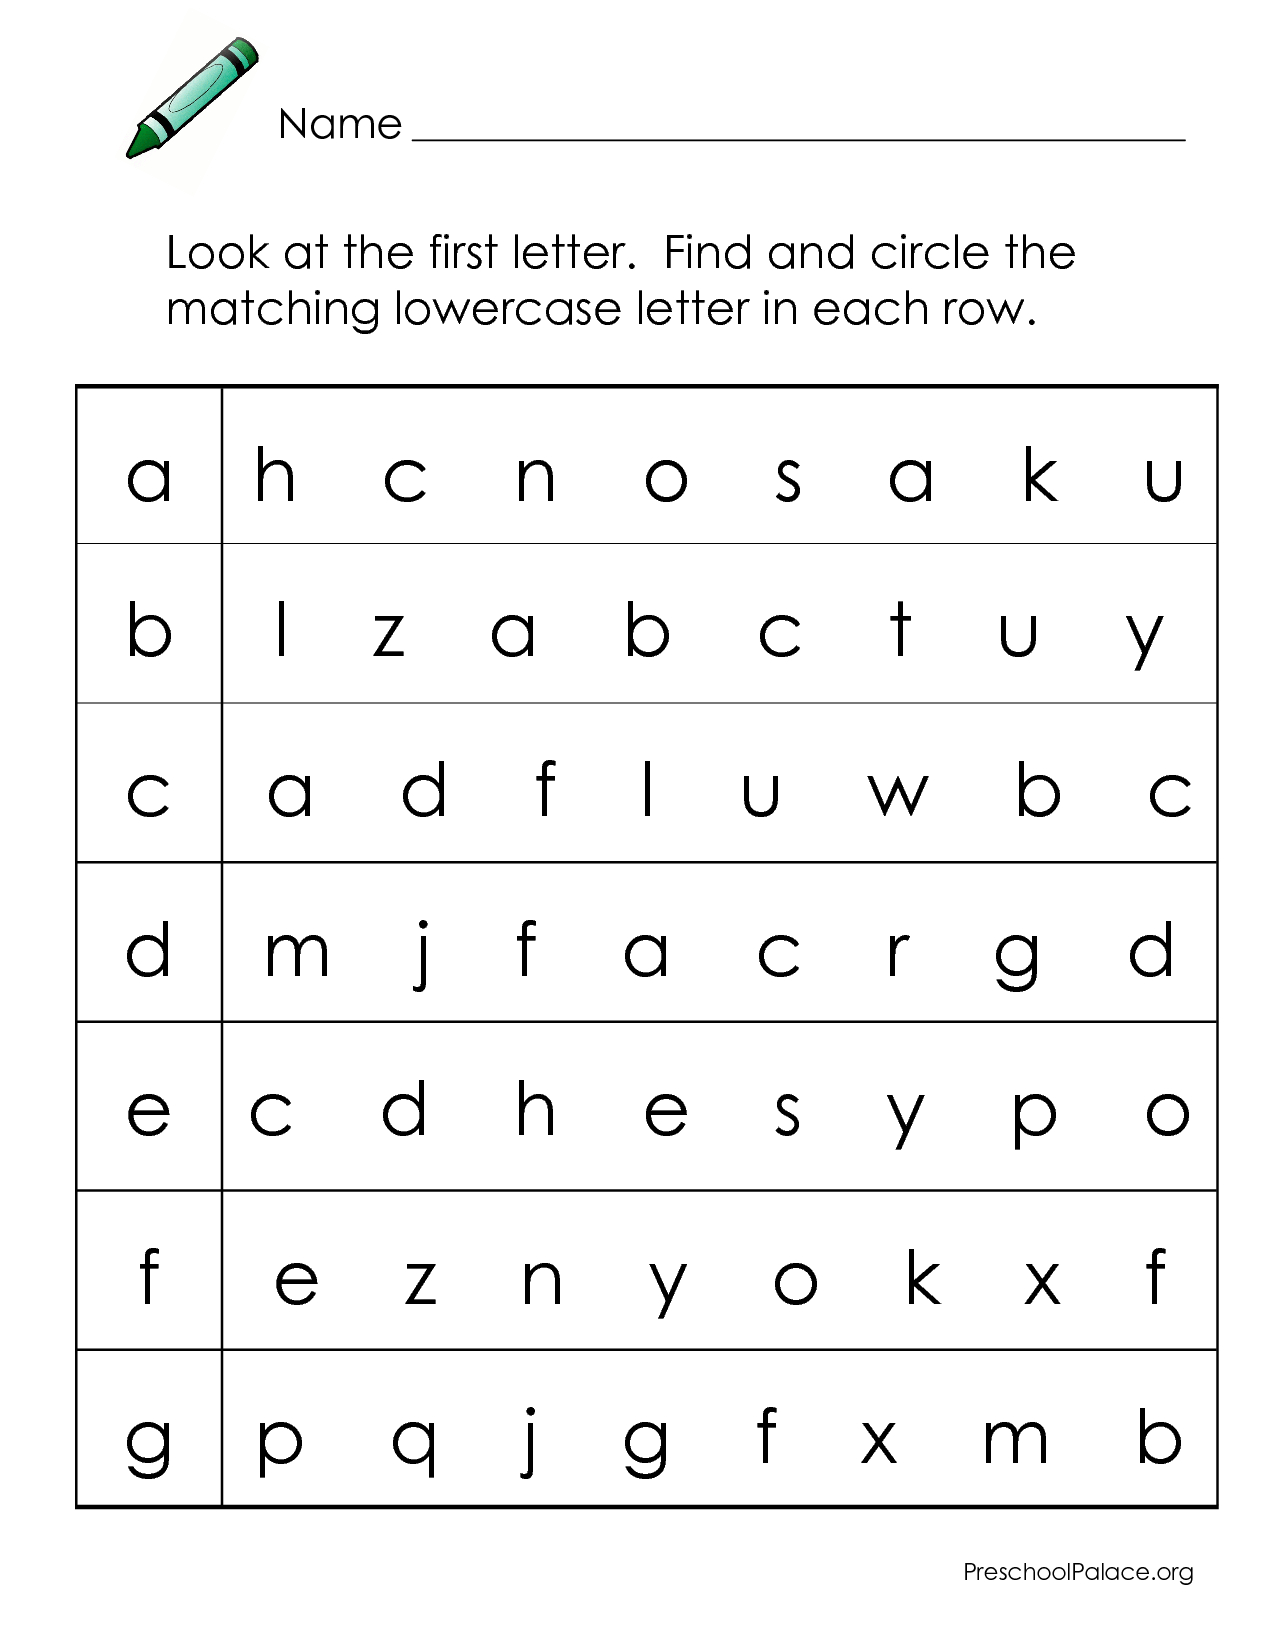 Alphabet Worksheets For Preschoolers | Abcs - Letter within Alphabet Search Worksheets